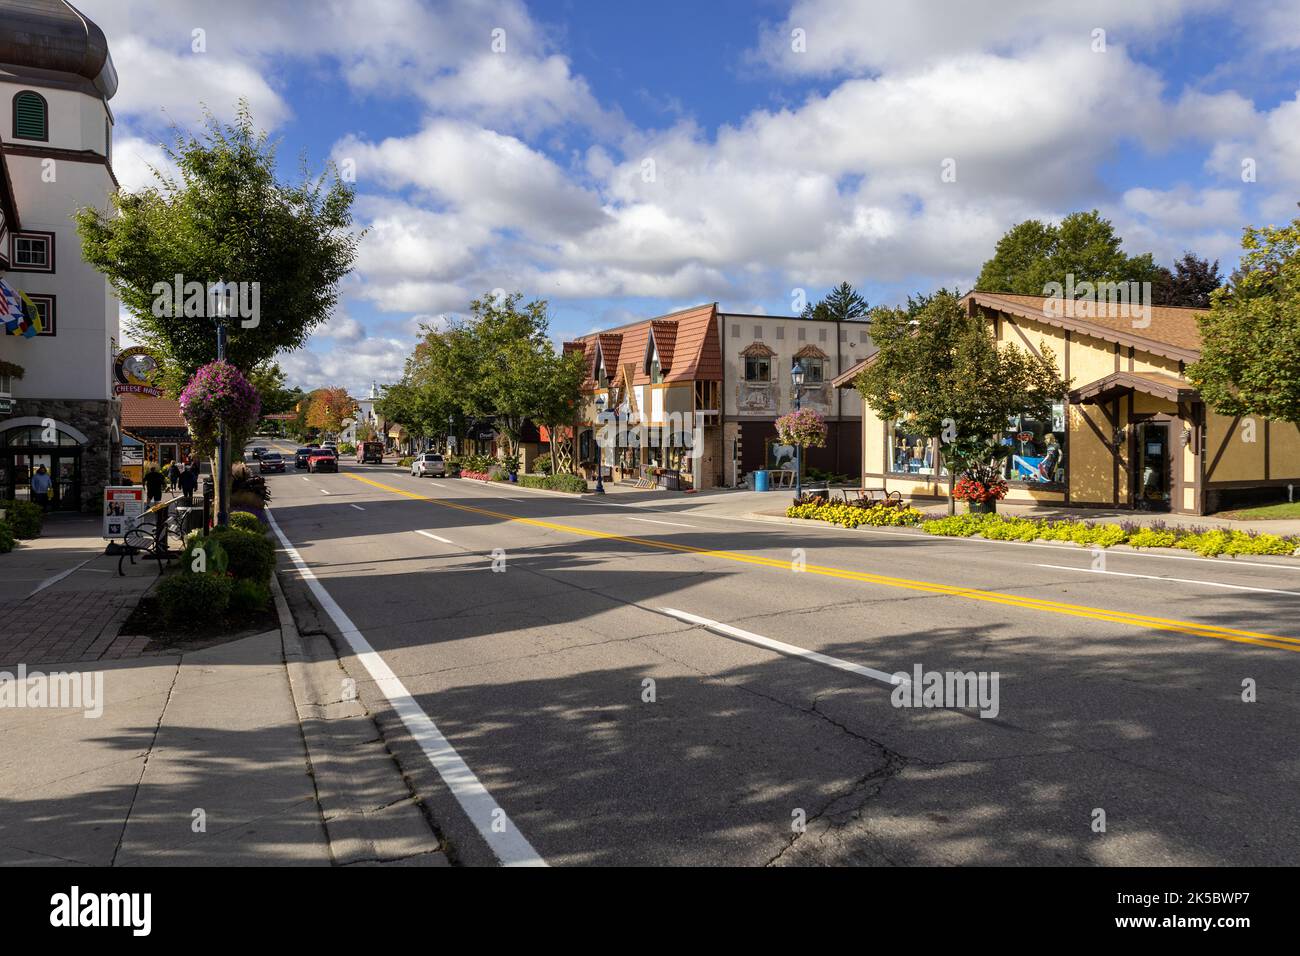 Downtown Frankenmuth On Main Street In Frankenmuth Michigan, Known As Michigan's Little Bavaria Stock Photo